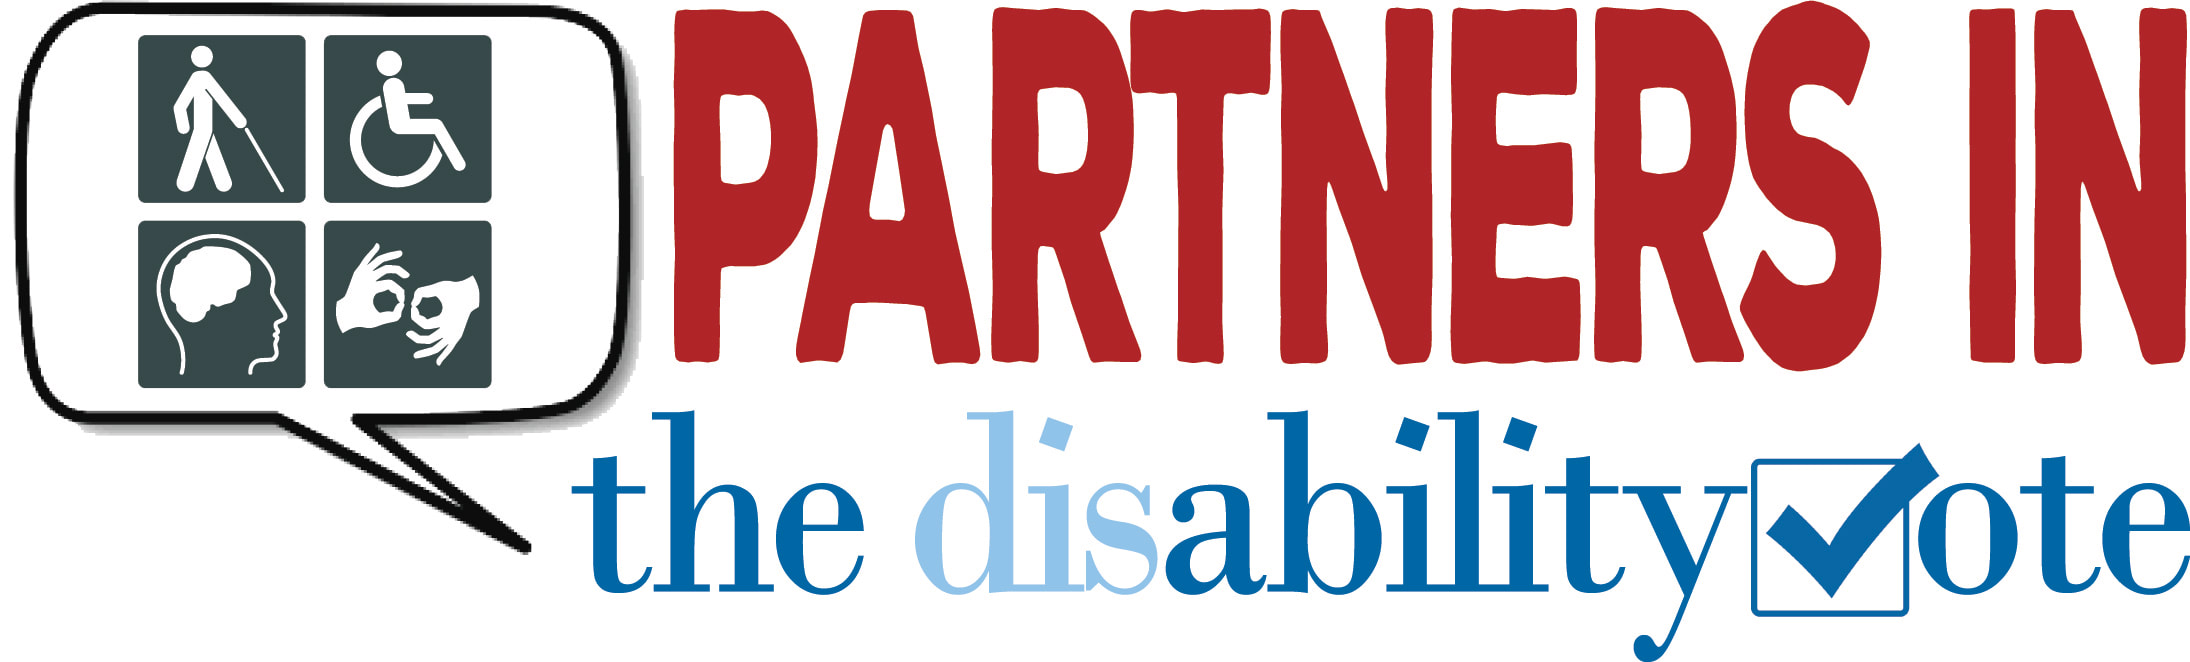 Image Partners in the Disability Vote logo with communication bubble with disability symbols and the V of vote as a checkmark